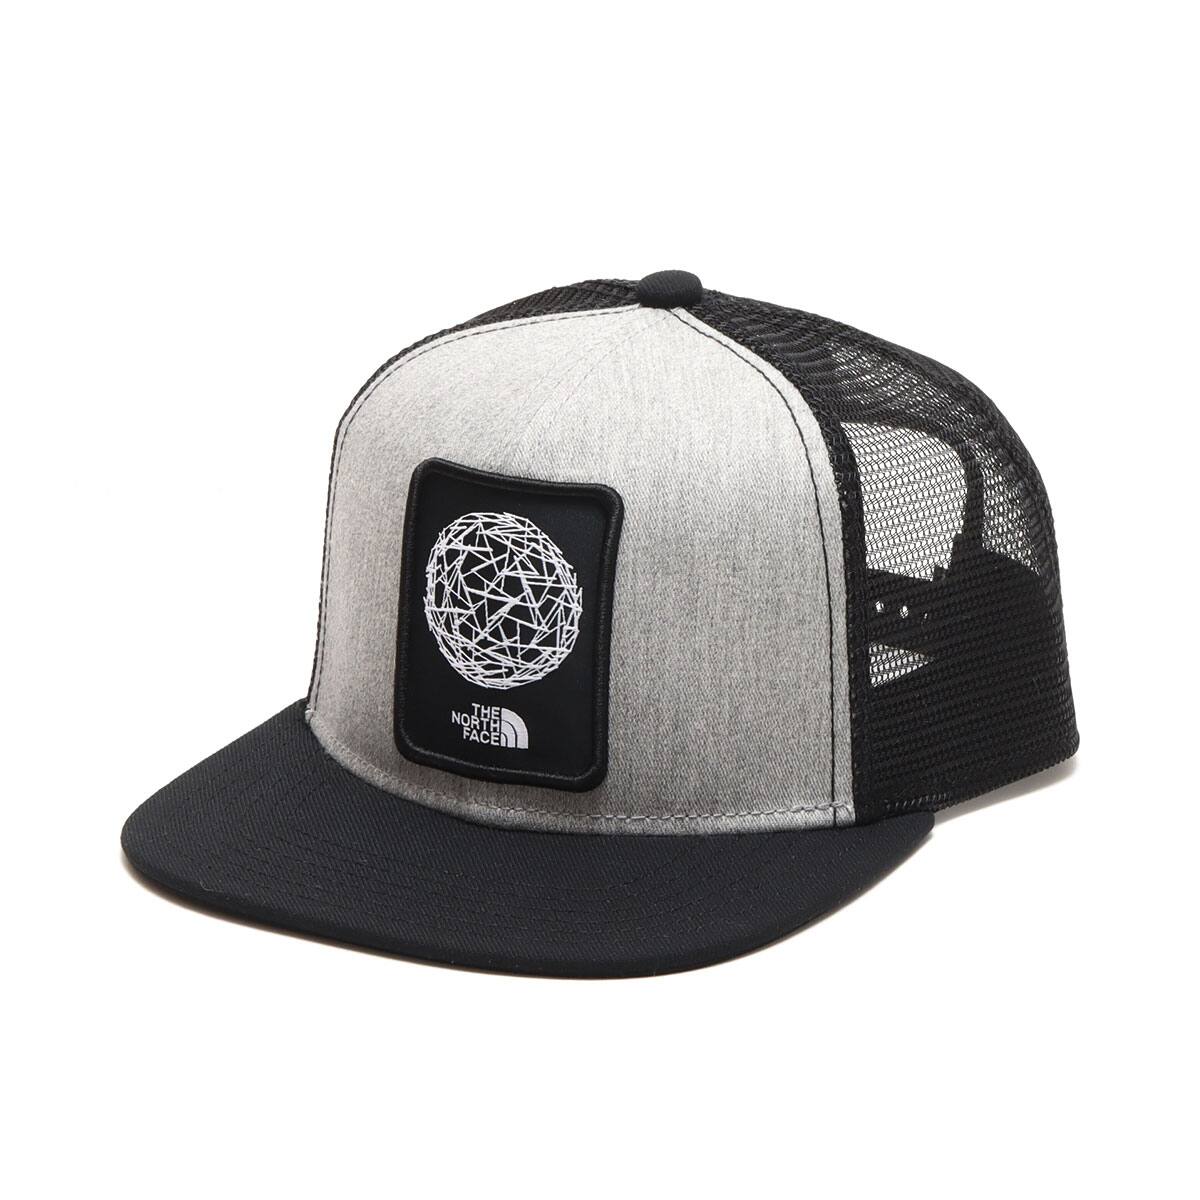 THE NORTH FACE  Message Mesh Cap